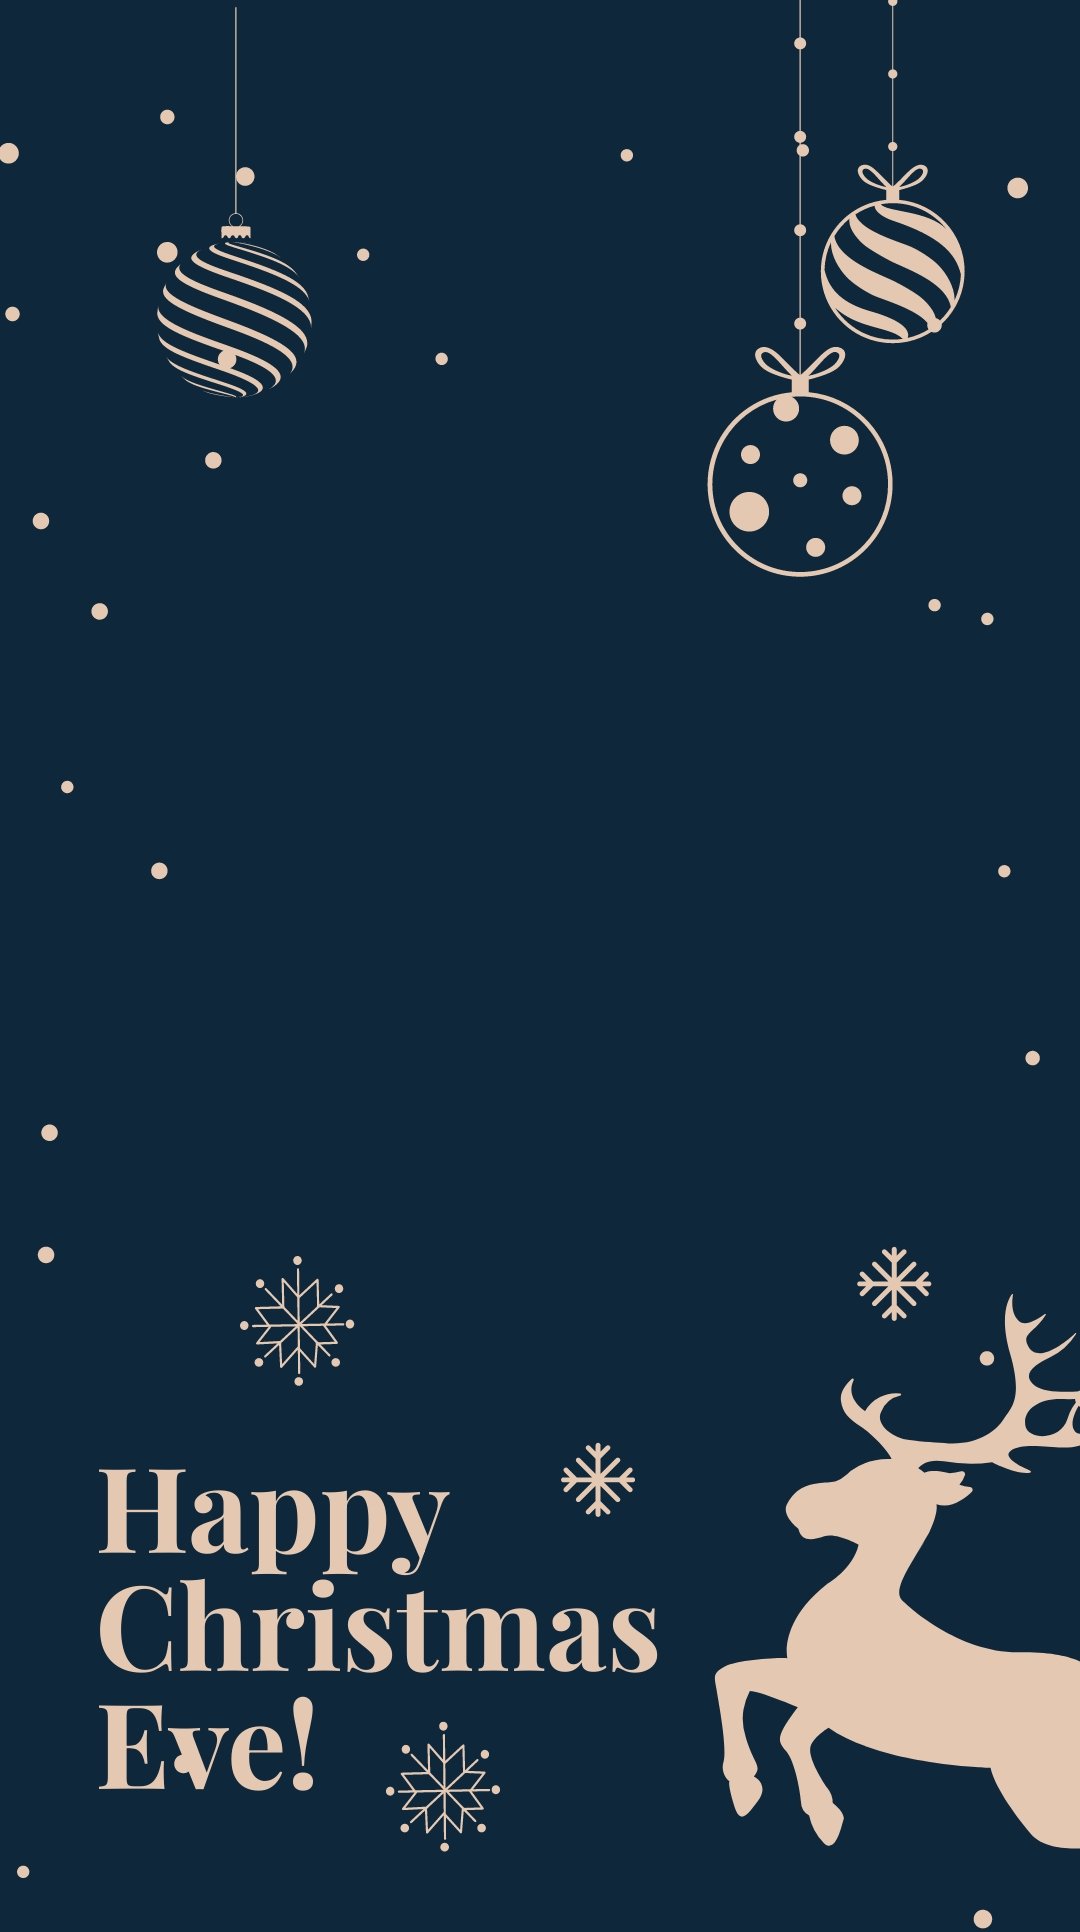 Free Christmas Eve Snapchat Geofilter Template